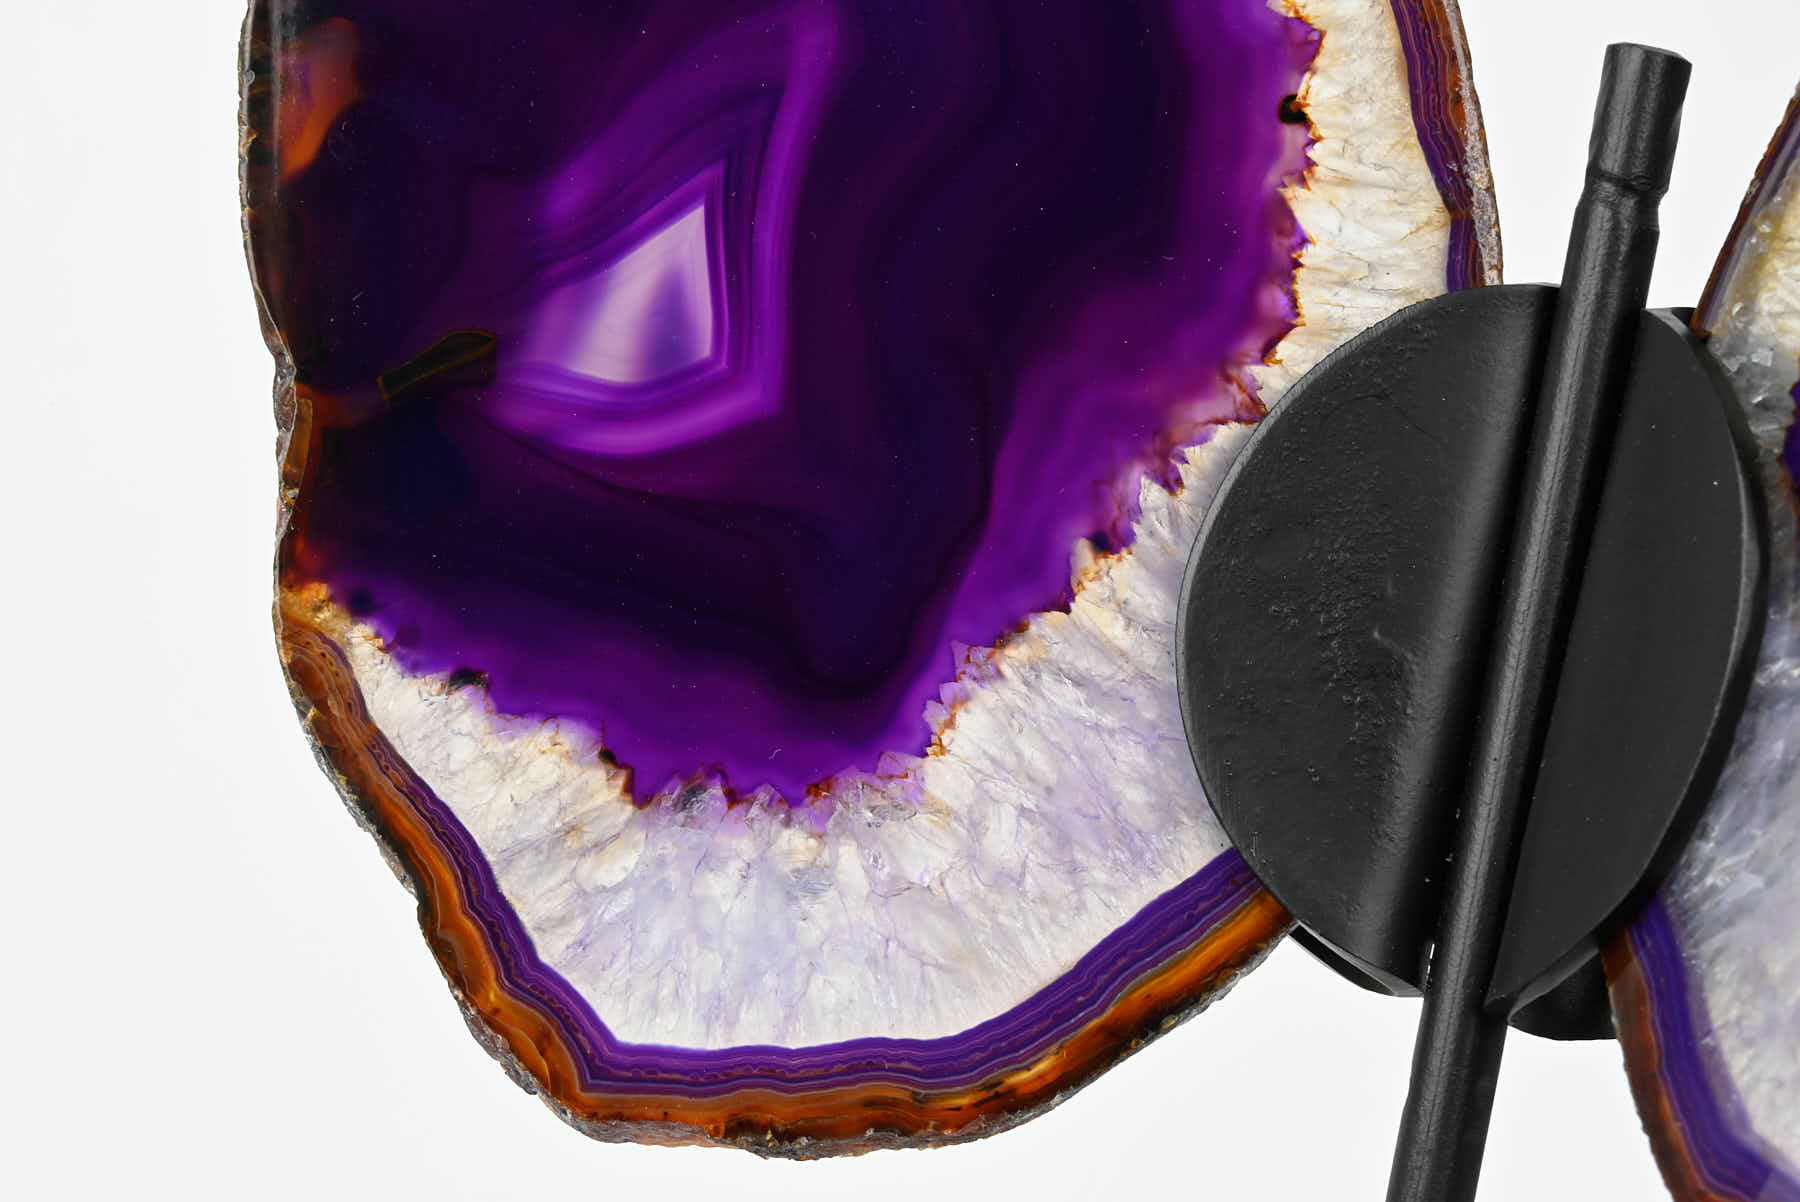 Purple Agate Butterfly on Stand - 0.62kg and 24cm Tall - #BUPURP-10006